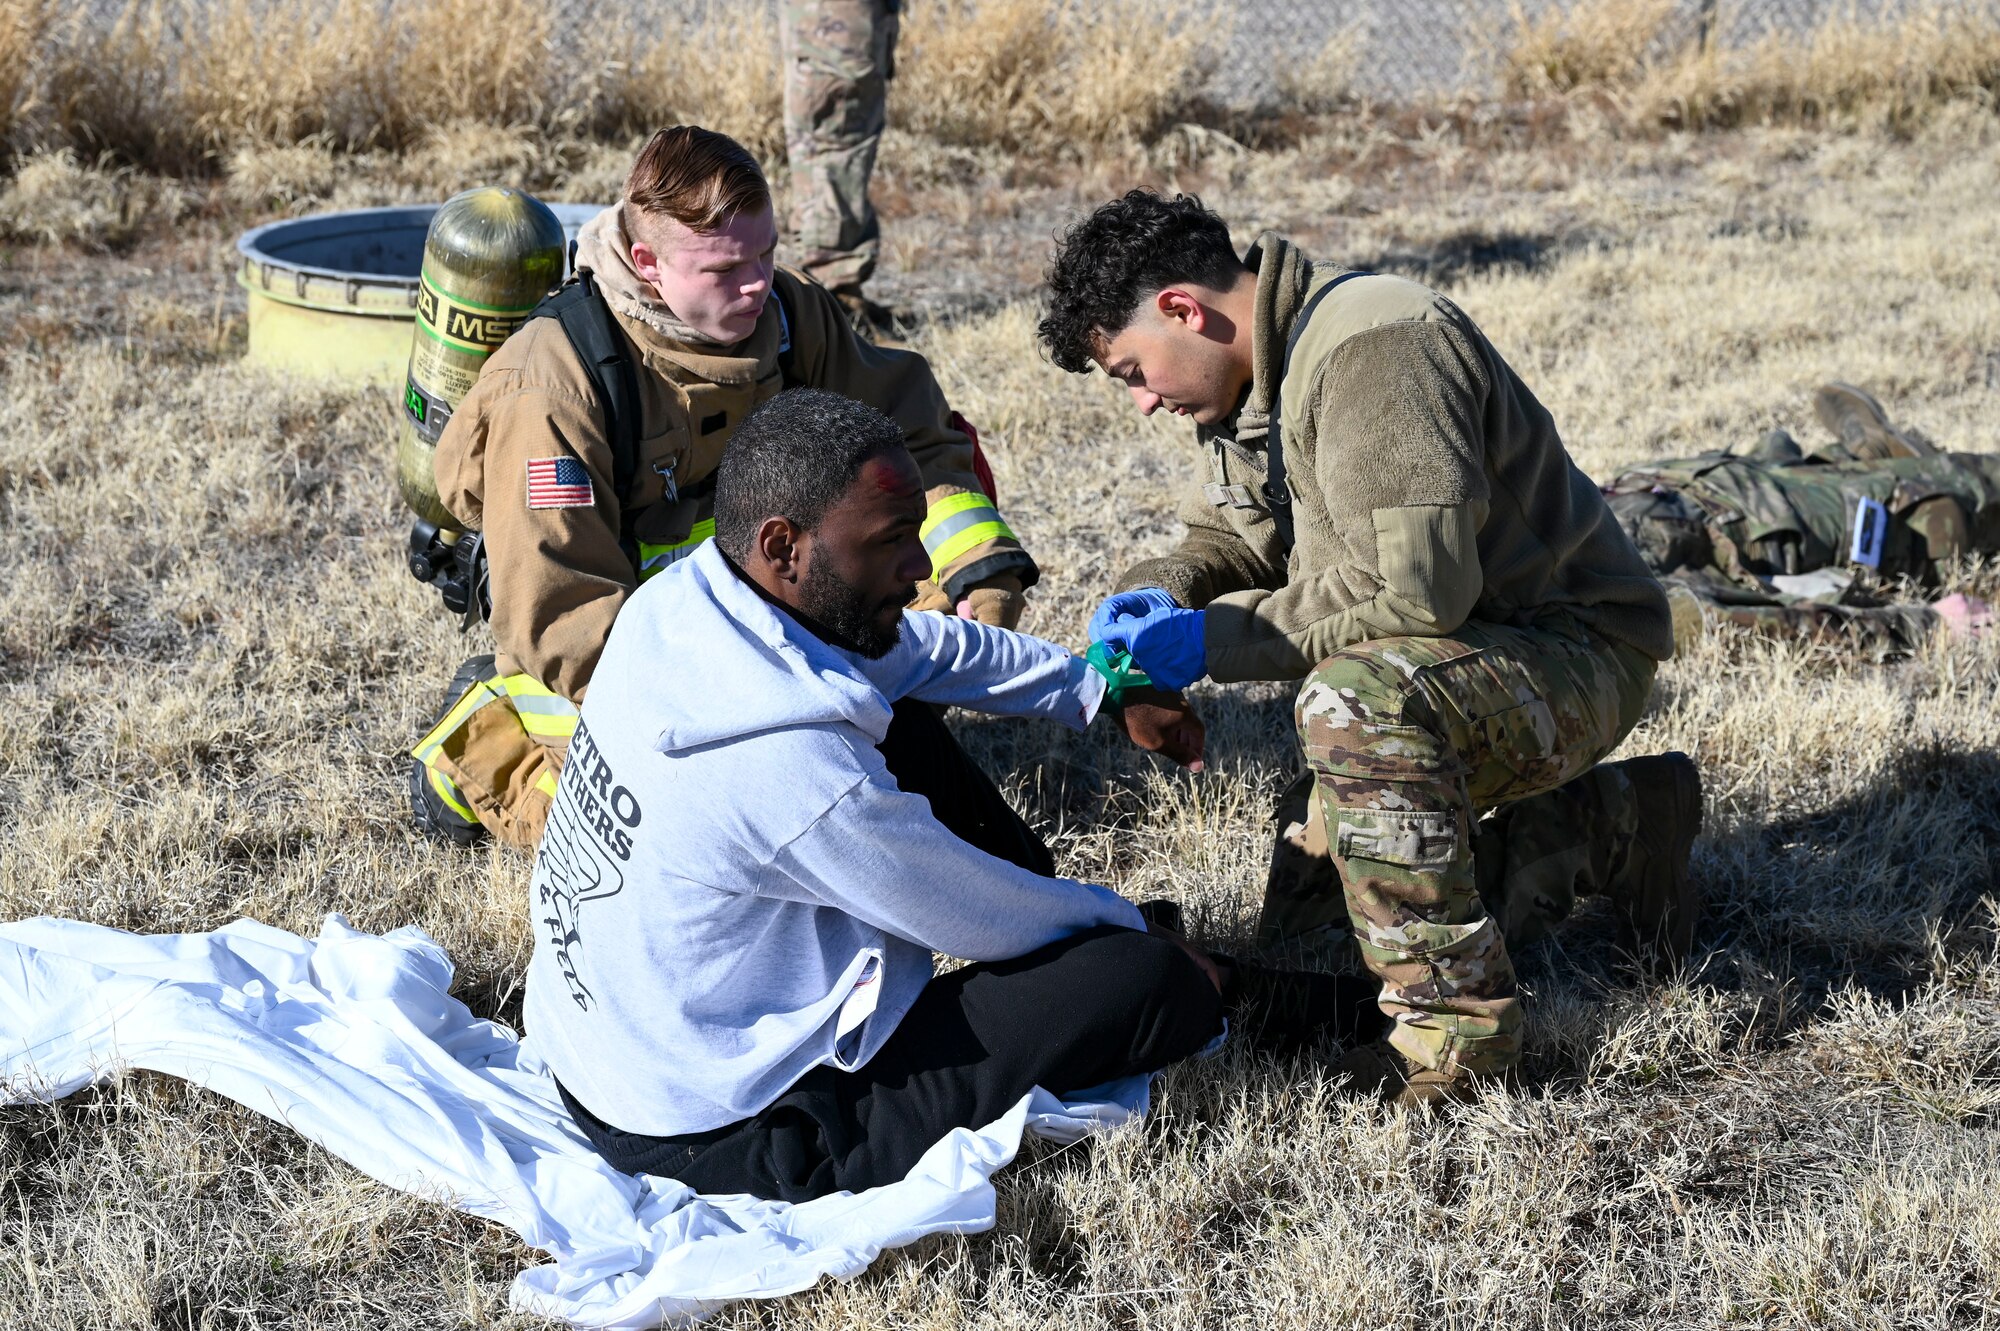 Airmen provide treatment to simulated casualties during a mass casualty training exercise at Davis-Monthan Air Force Base